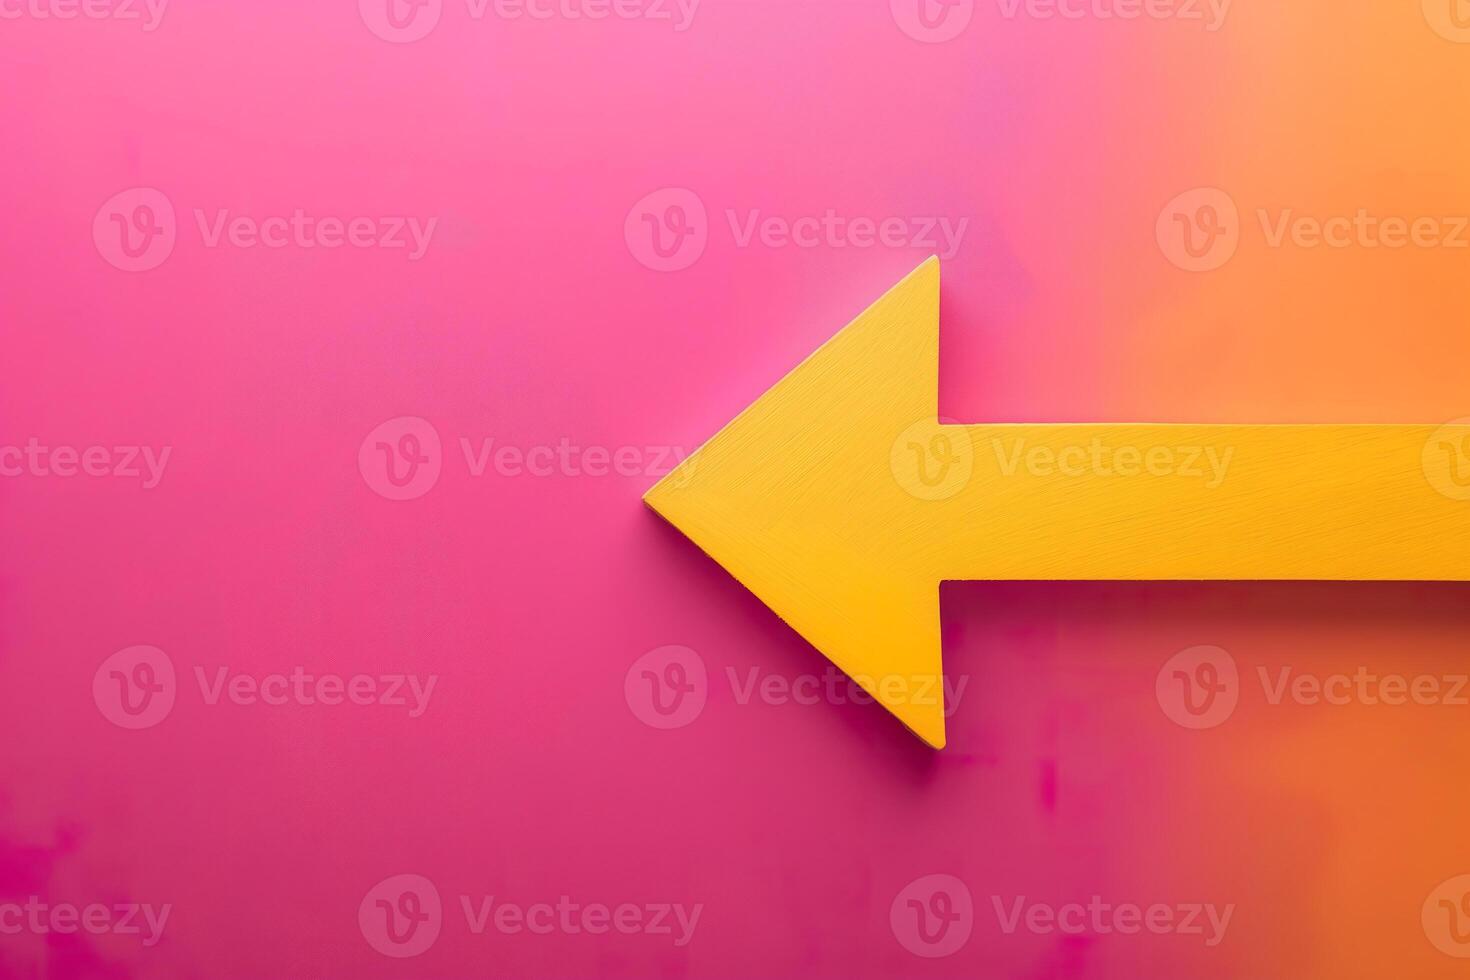 A yellow arrow pointing to the right against a pink background. photo